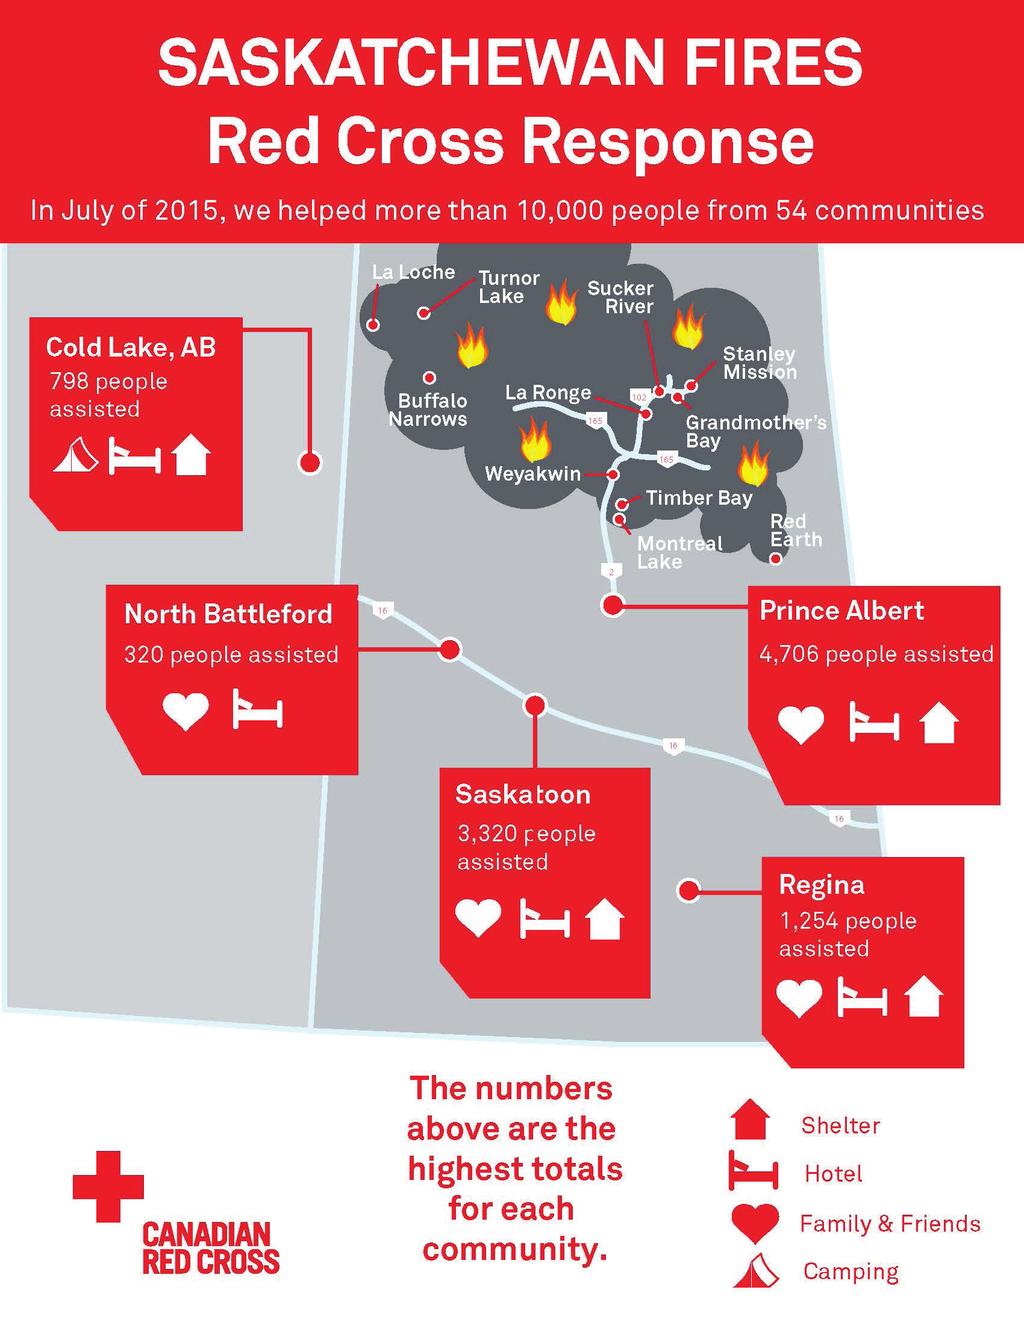 during the largest natural disaster in the province s history. A total of 154 Red Cross staff responded immediately, working over 10,600 hours.